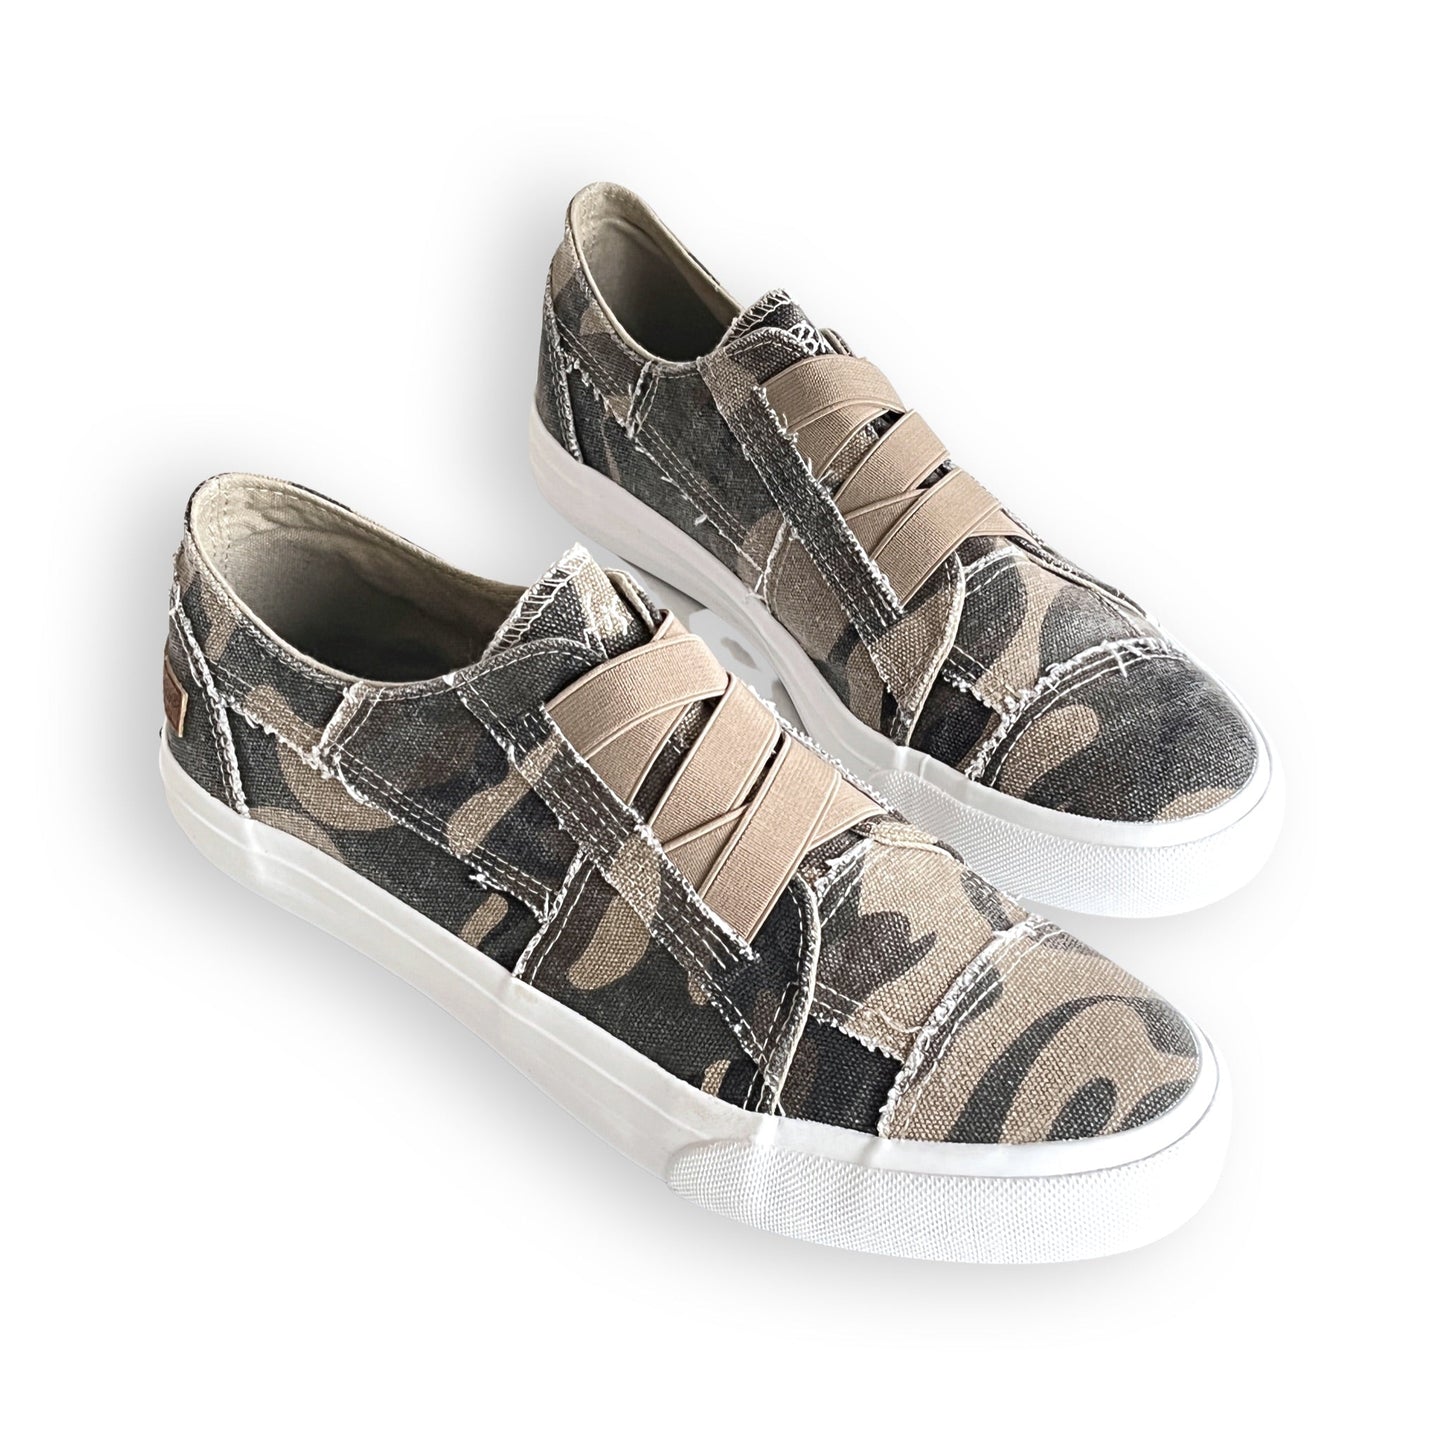 Marley Sneaker in Natural Camo